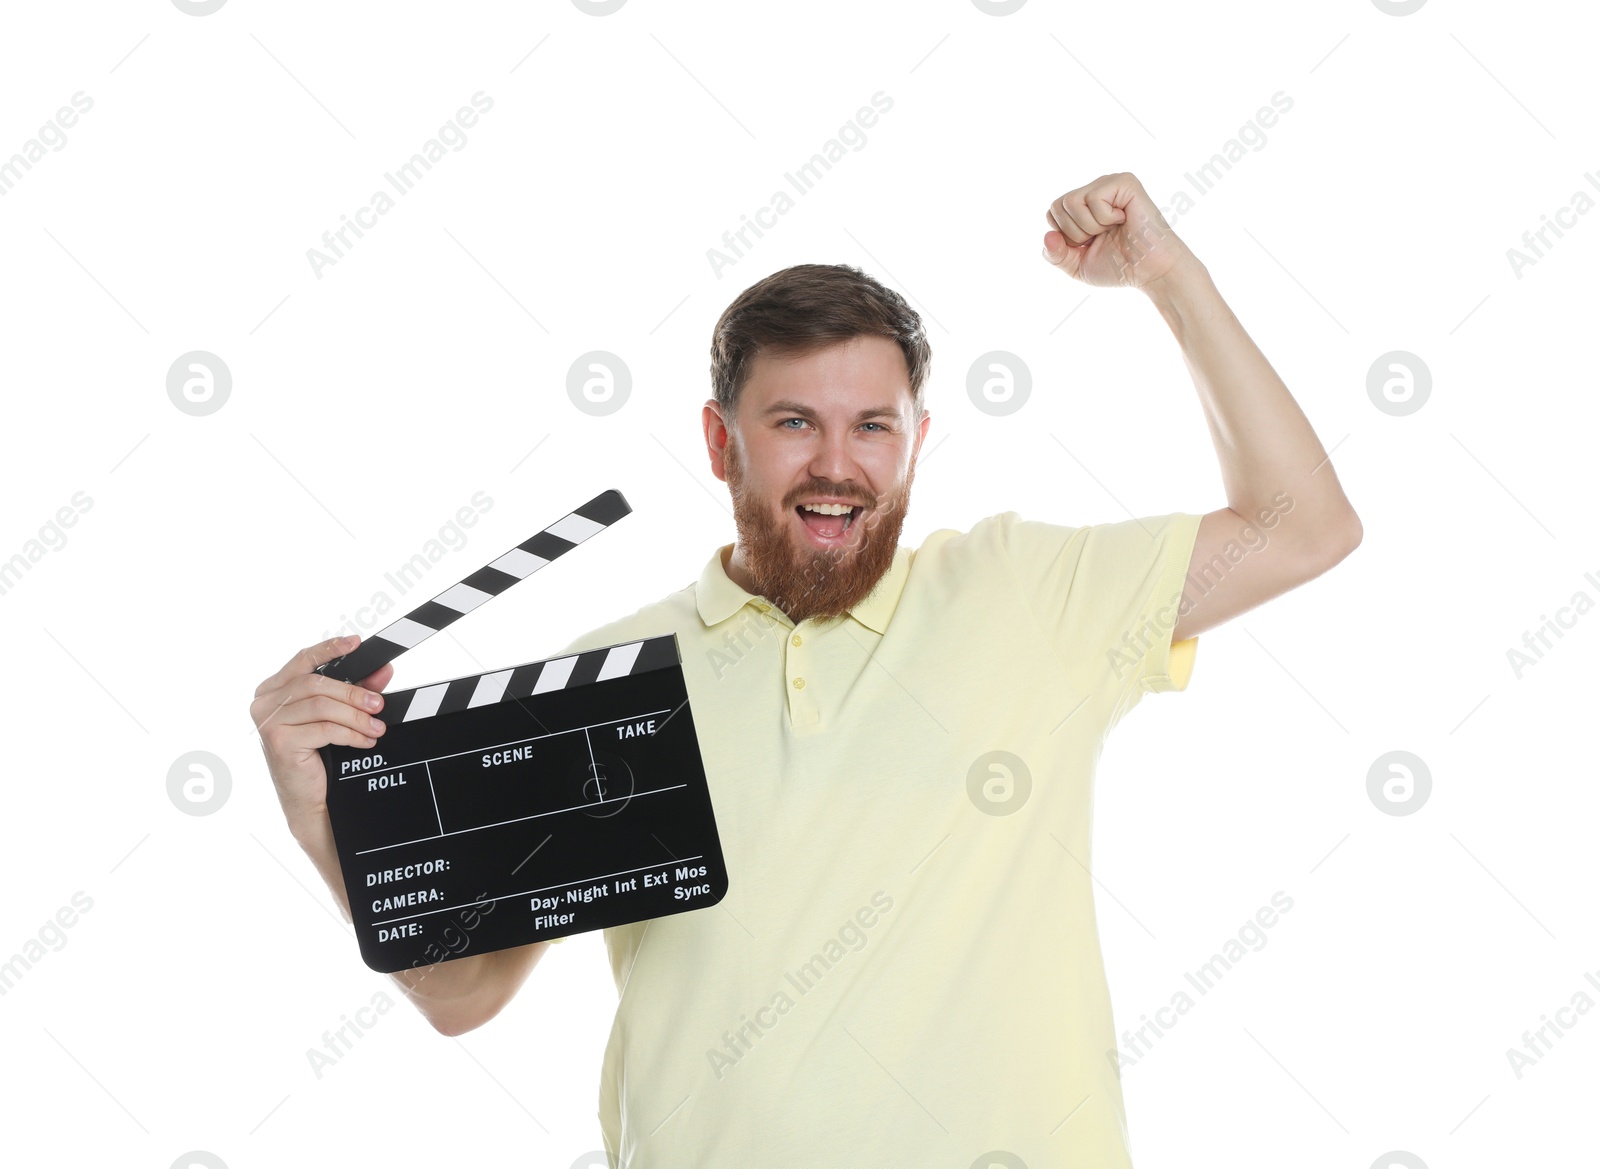 Photo of Making movie. Happy man with clapperboard on white background